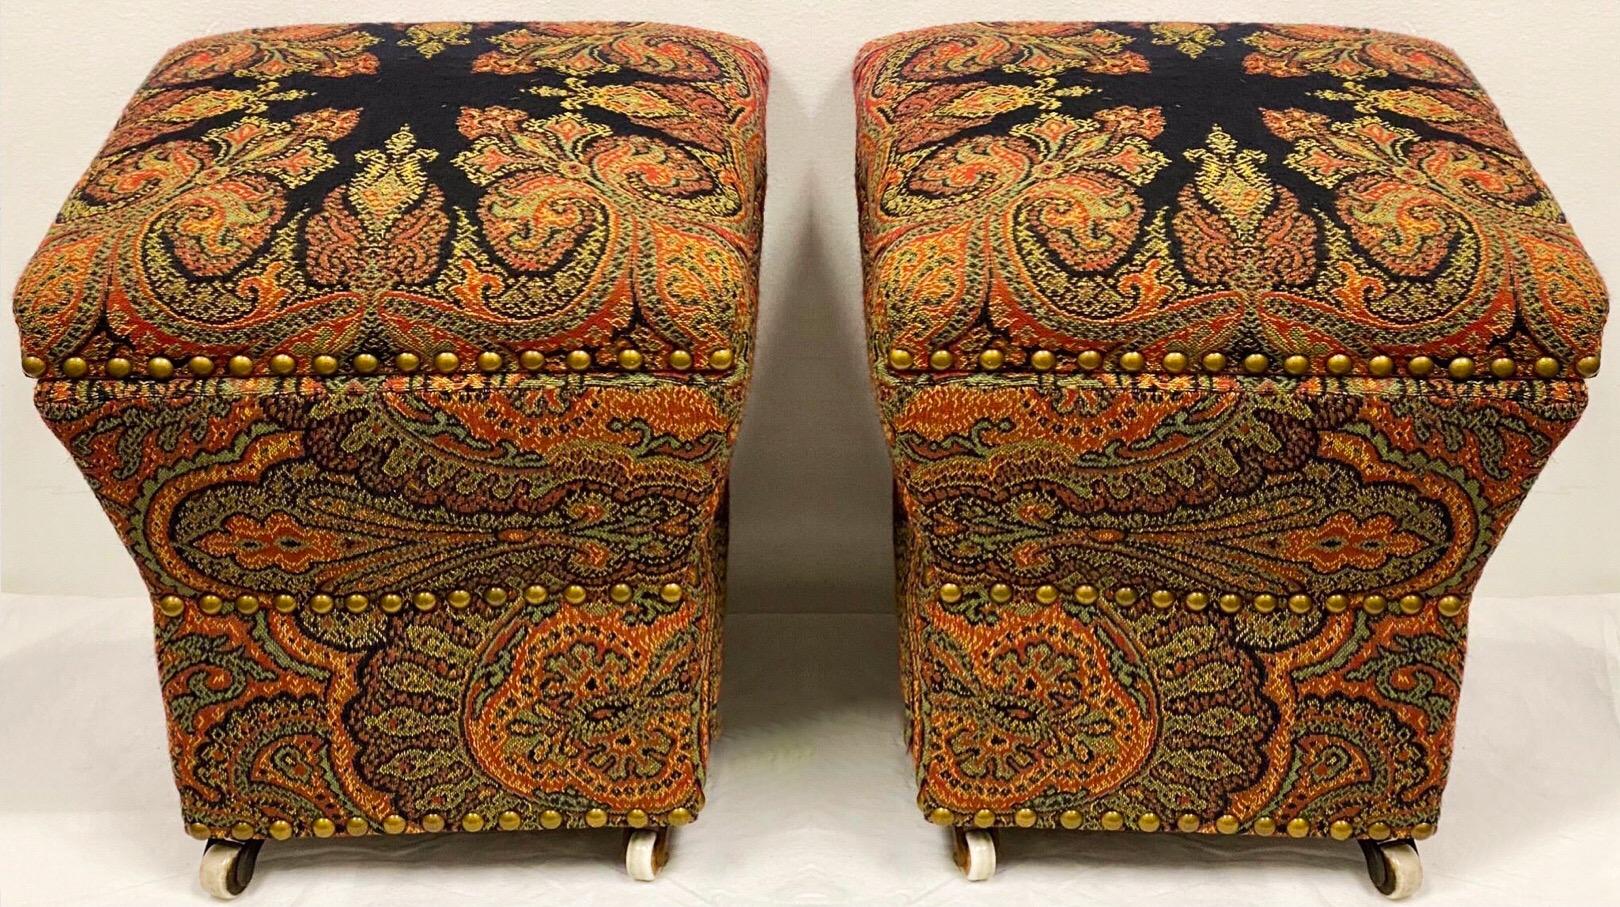 Brass English Paisley Upholstered Storage Ottomans, a Pair For Sale